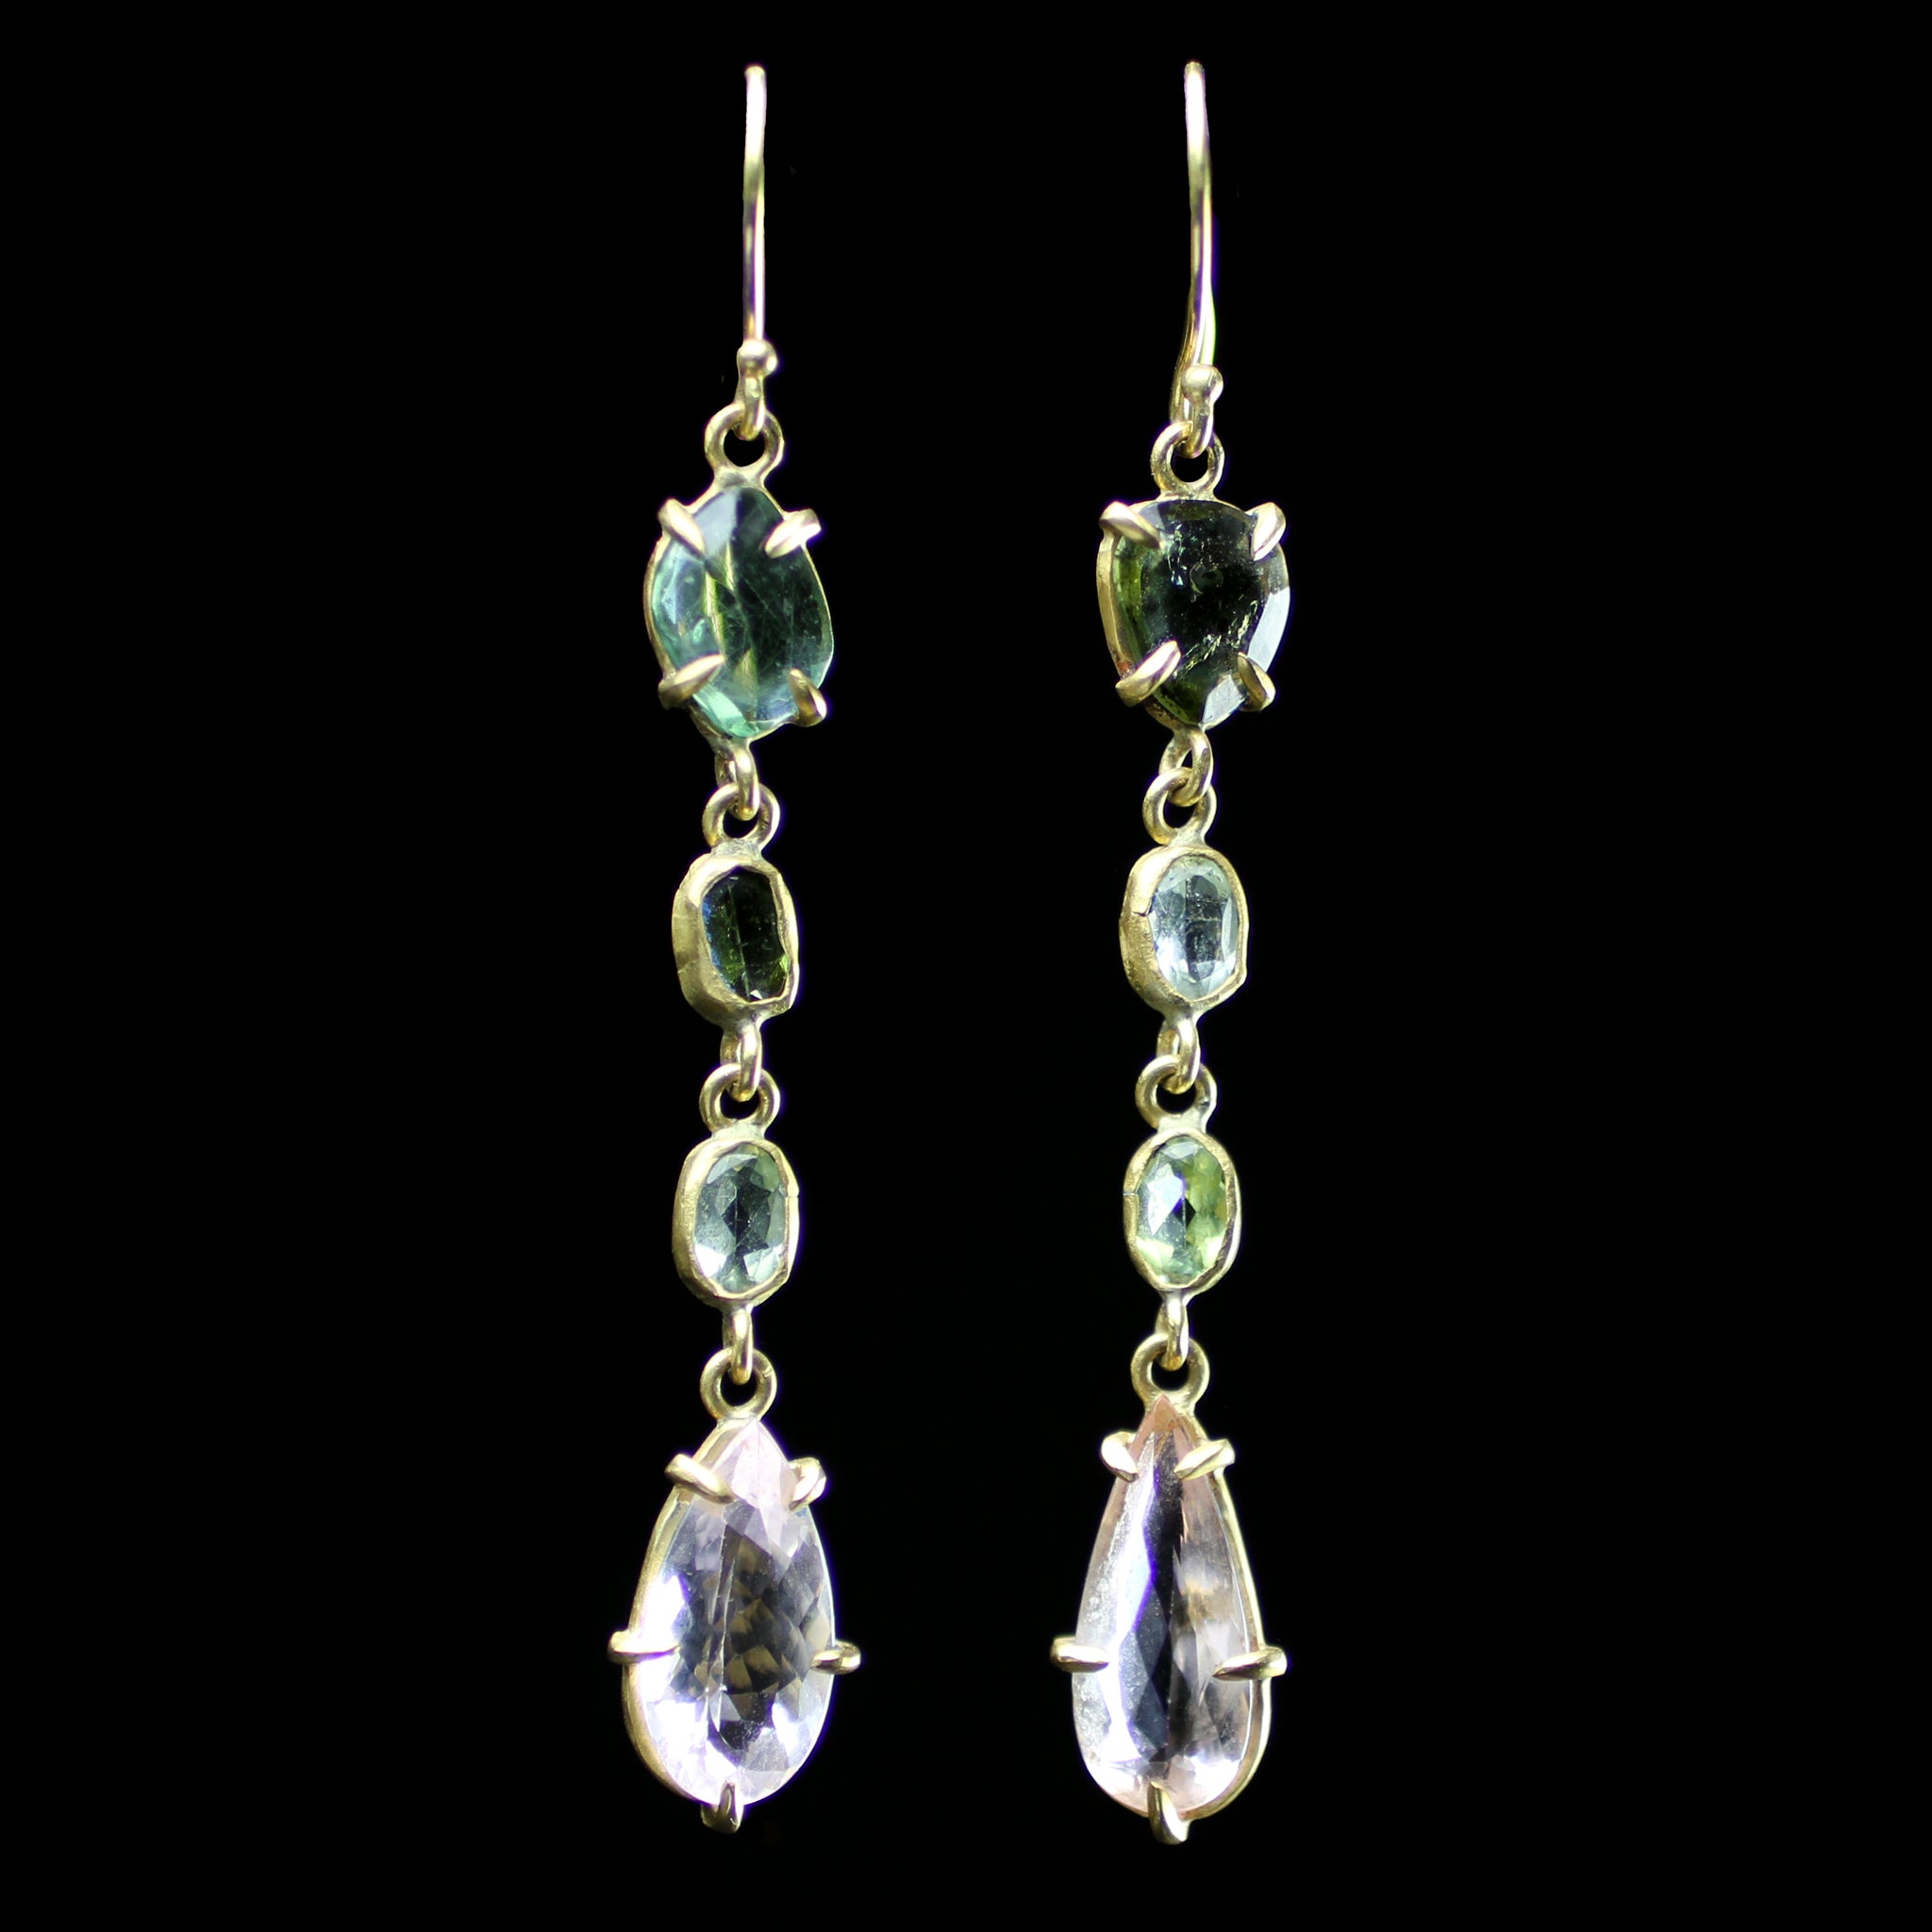 22k gold morganite and green tourmaline earrings hand made by fine jewelry designer Margery Hirschey